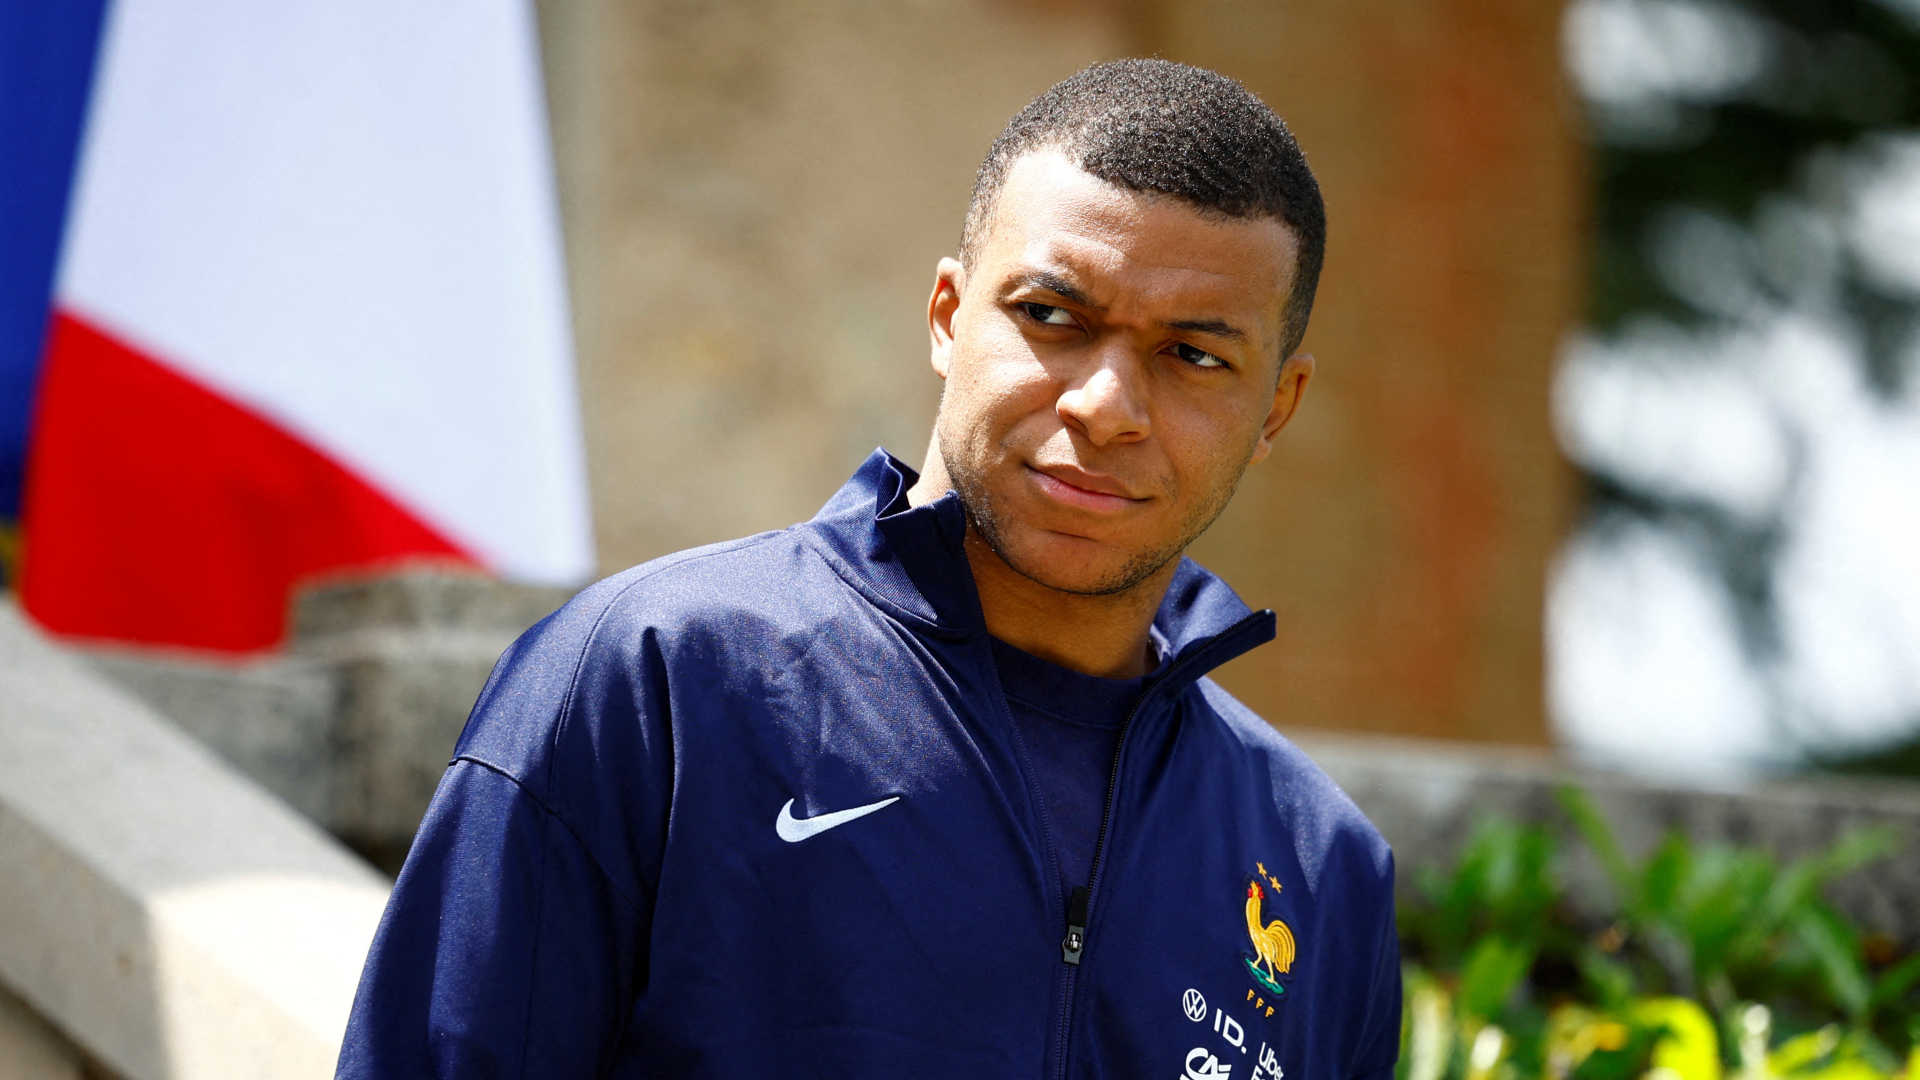 Mbappe not included in Olympic team